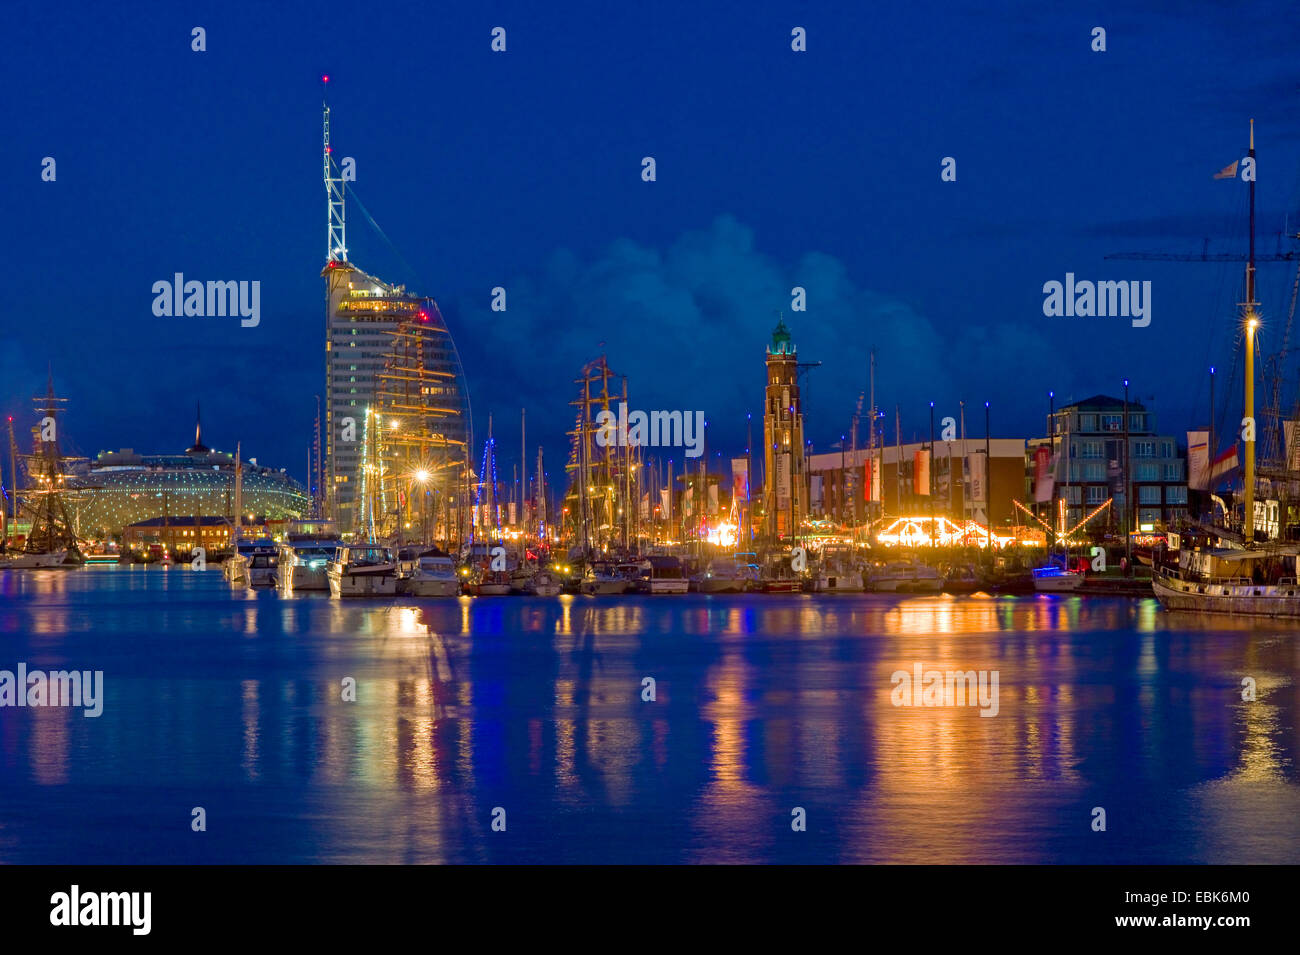 tall ships in harbour at night, lighthouse, hotel Atlantic and Klimahaus in background, Germany, Bremerhaven Stock Photo